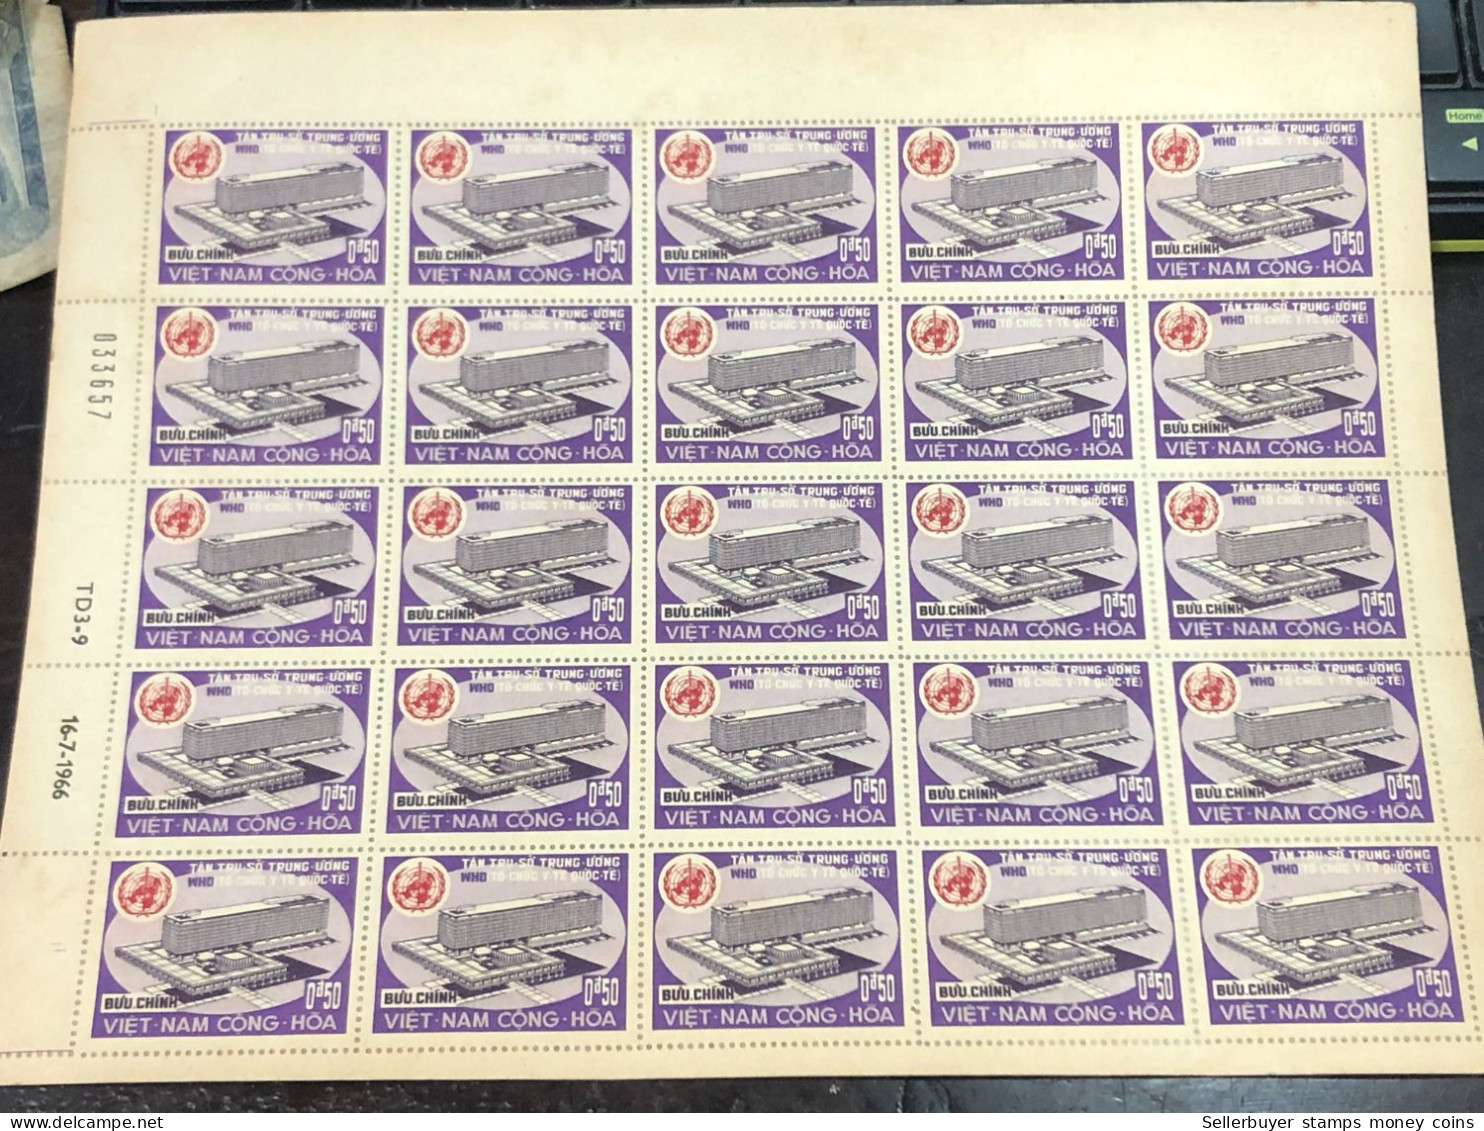 Vietnam South Sheet Stamps Before 1975(0$ 50 World Health Organization1966) 1 Pcs25 Stamps Quality Good - Vietnam